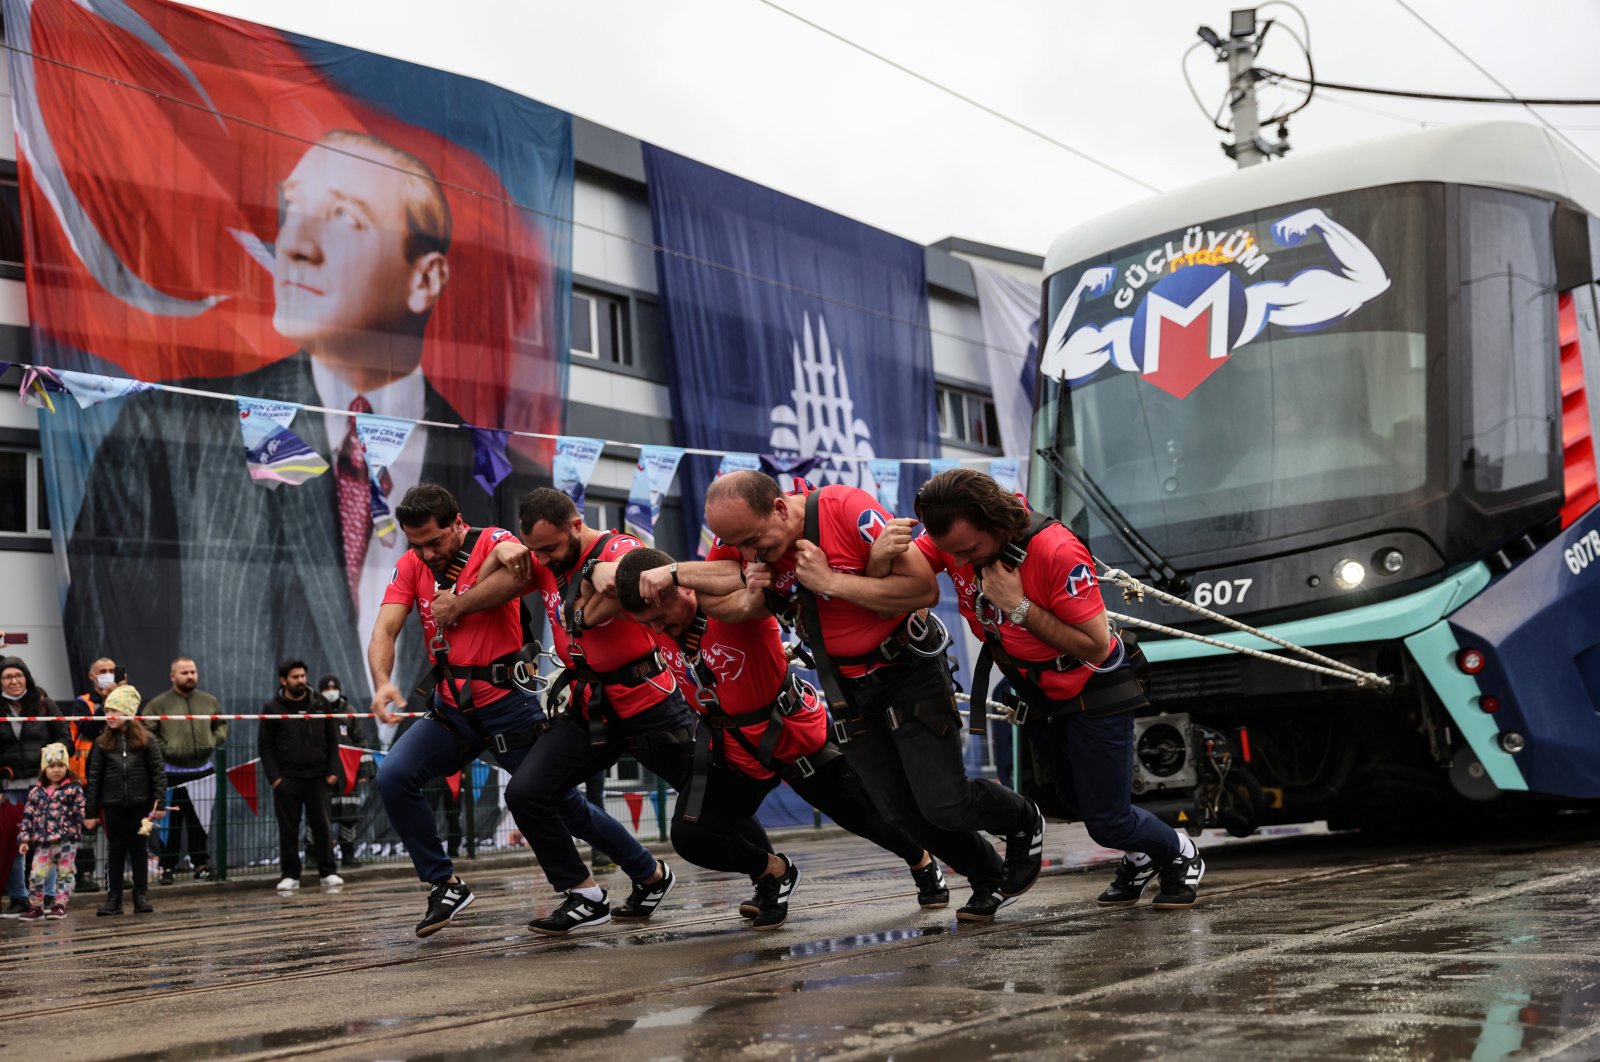 A team pulls the tram during the contest, in Istanbul, Turkey, Oct. 24, 2021. (REUTERS PHOTO) 